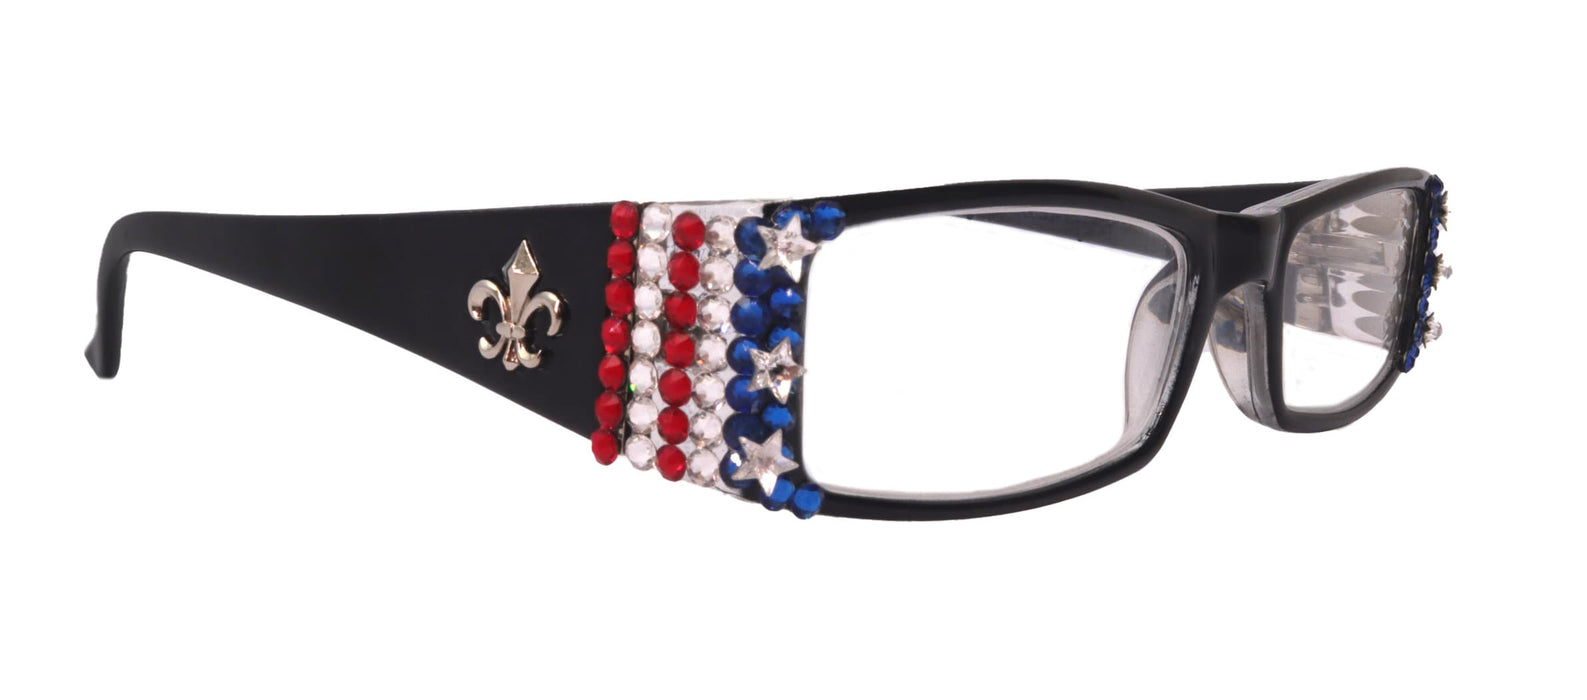 The French, (Bling) (Fleur De Lis) Women Reading Glasses W Genuine European Crystals (Black) NY Fifth Avenue